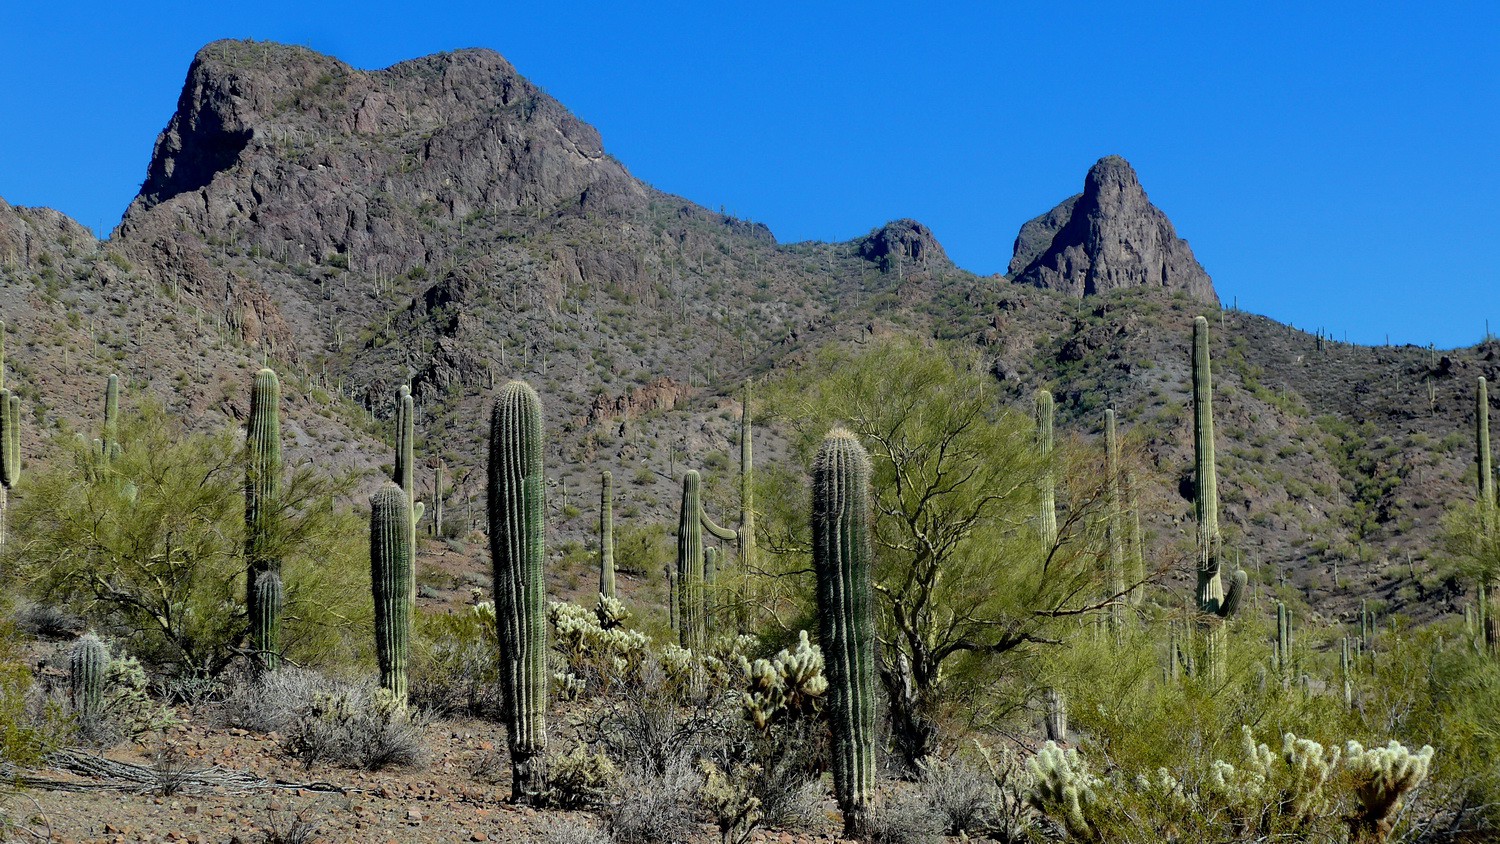 Saguaro Cactuses with steep Picacho Peak (on the right)